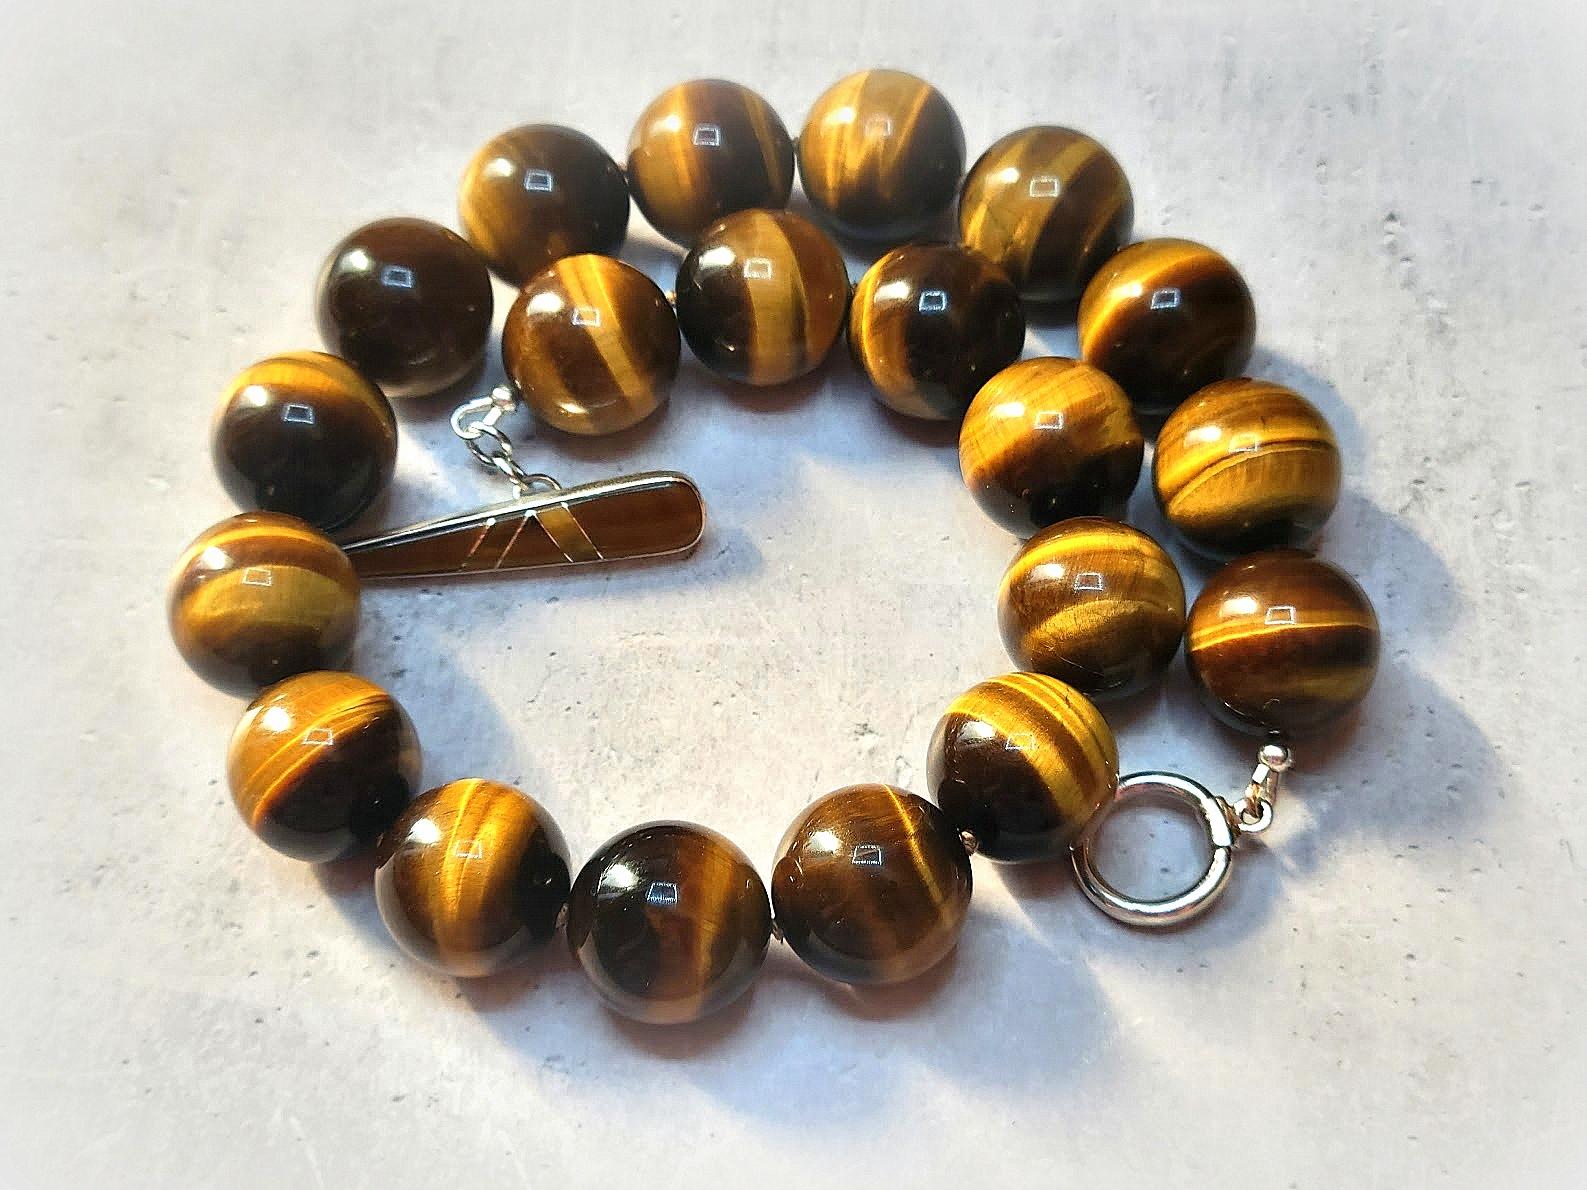 The length of the necklace is 18 inches (45.7 cm). The size of the smooth round beads is 20 mm.
The tones of the beads are a wondrous golden brown, caramel gold, and silky—gorgeous warm shades.
The color is authentic and natural. No thermal or other